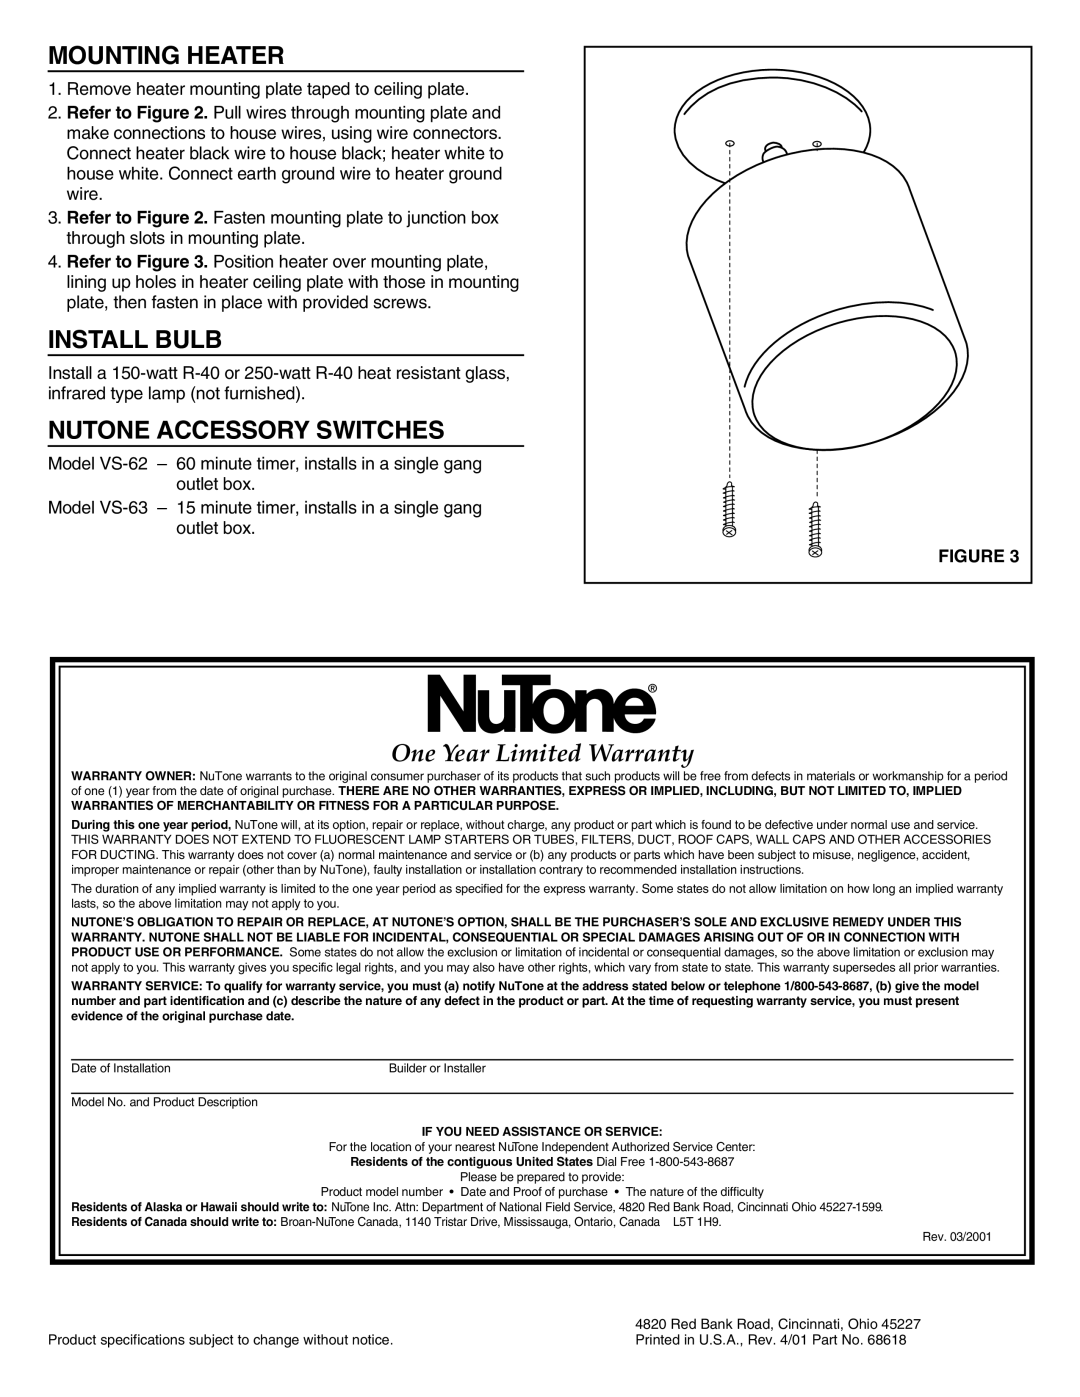 NuTone H-910W installation instructions Mounting Heater, Install Bulb, Nutone Accessory Switches, One Year Limited Warranty 